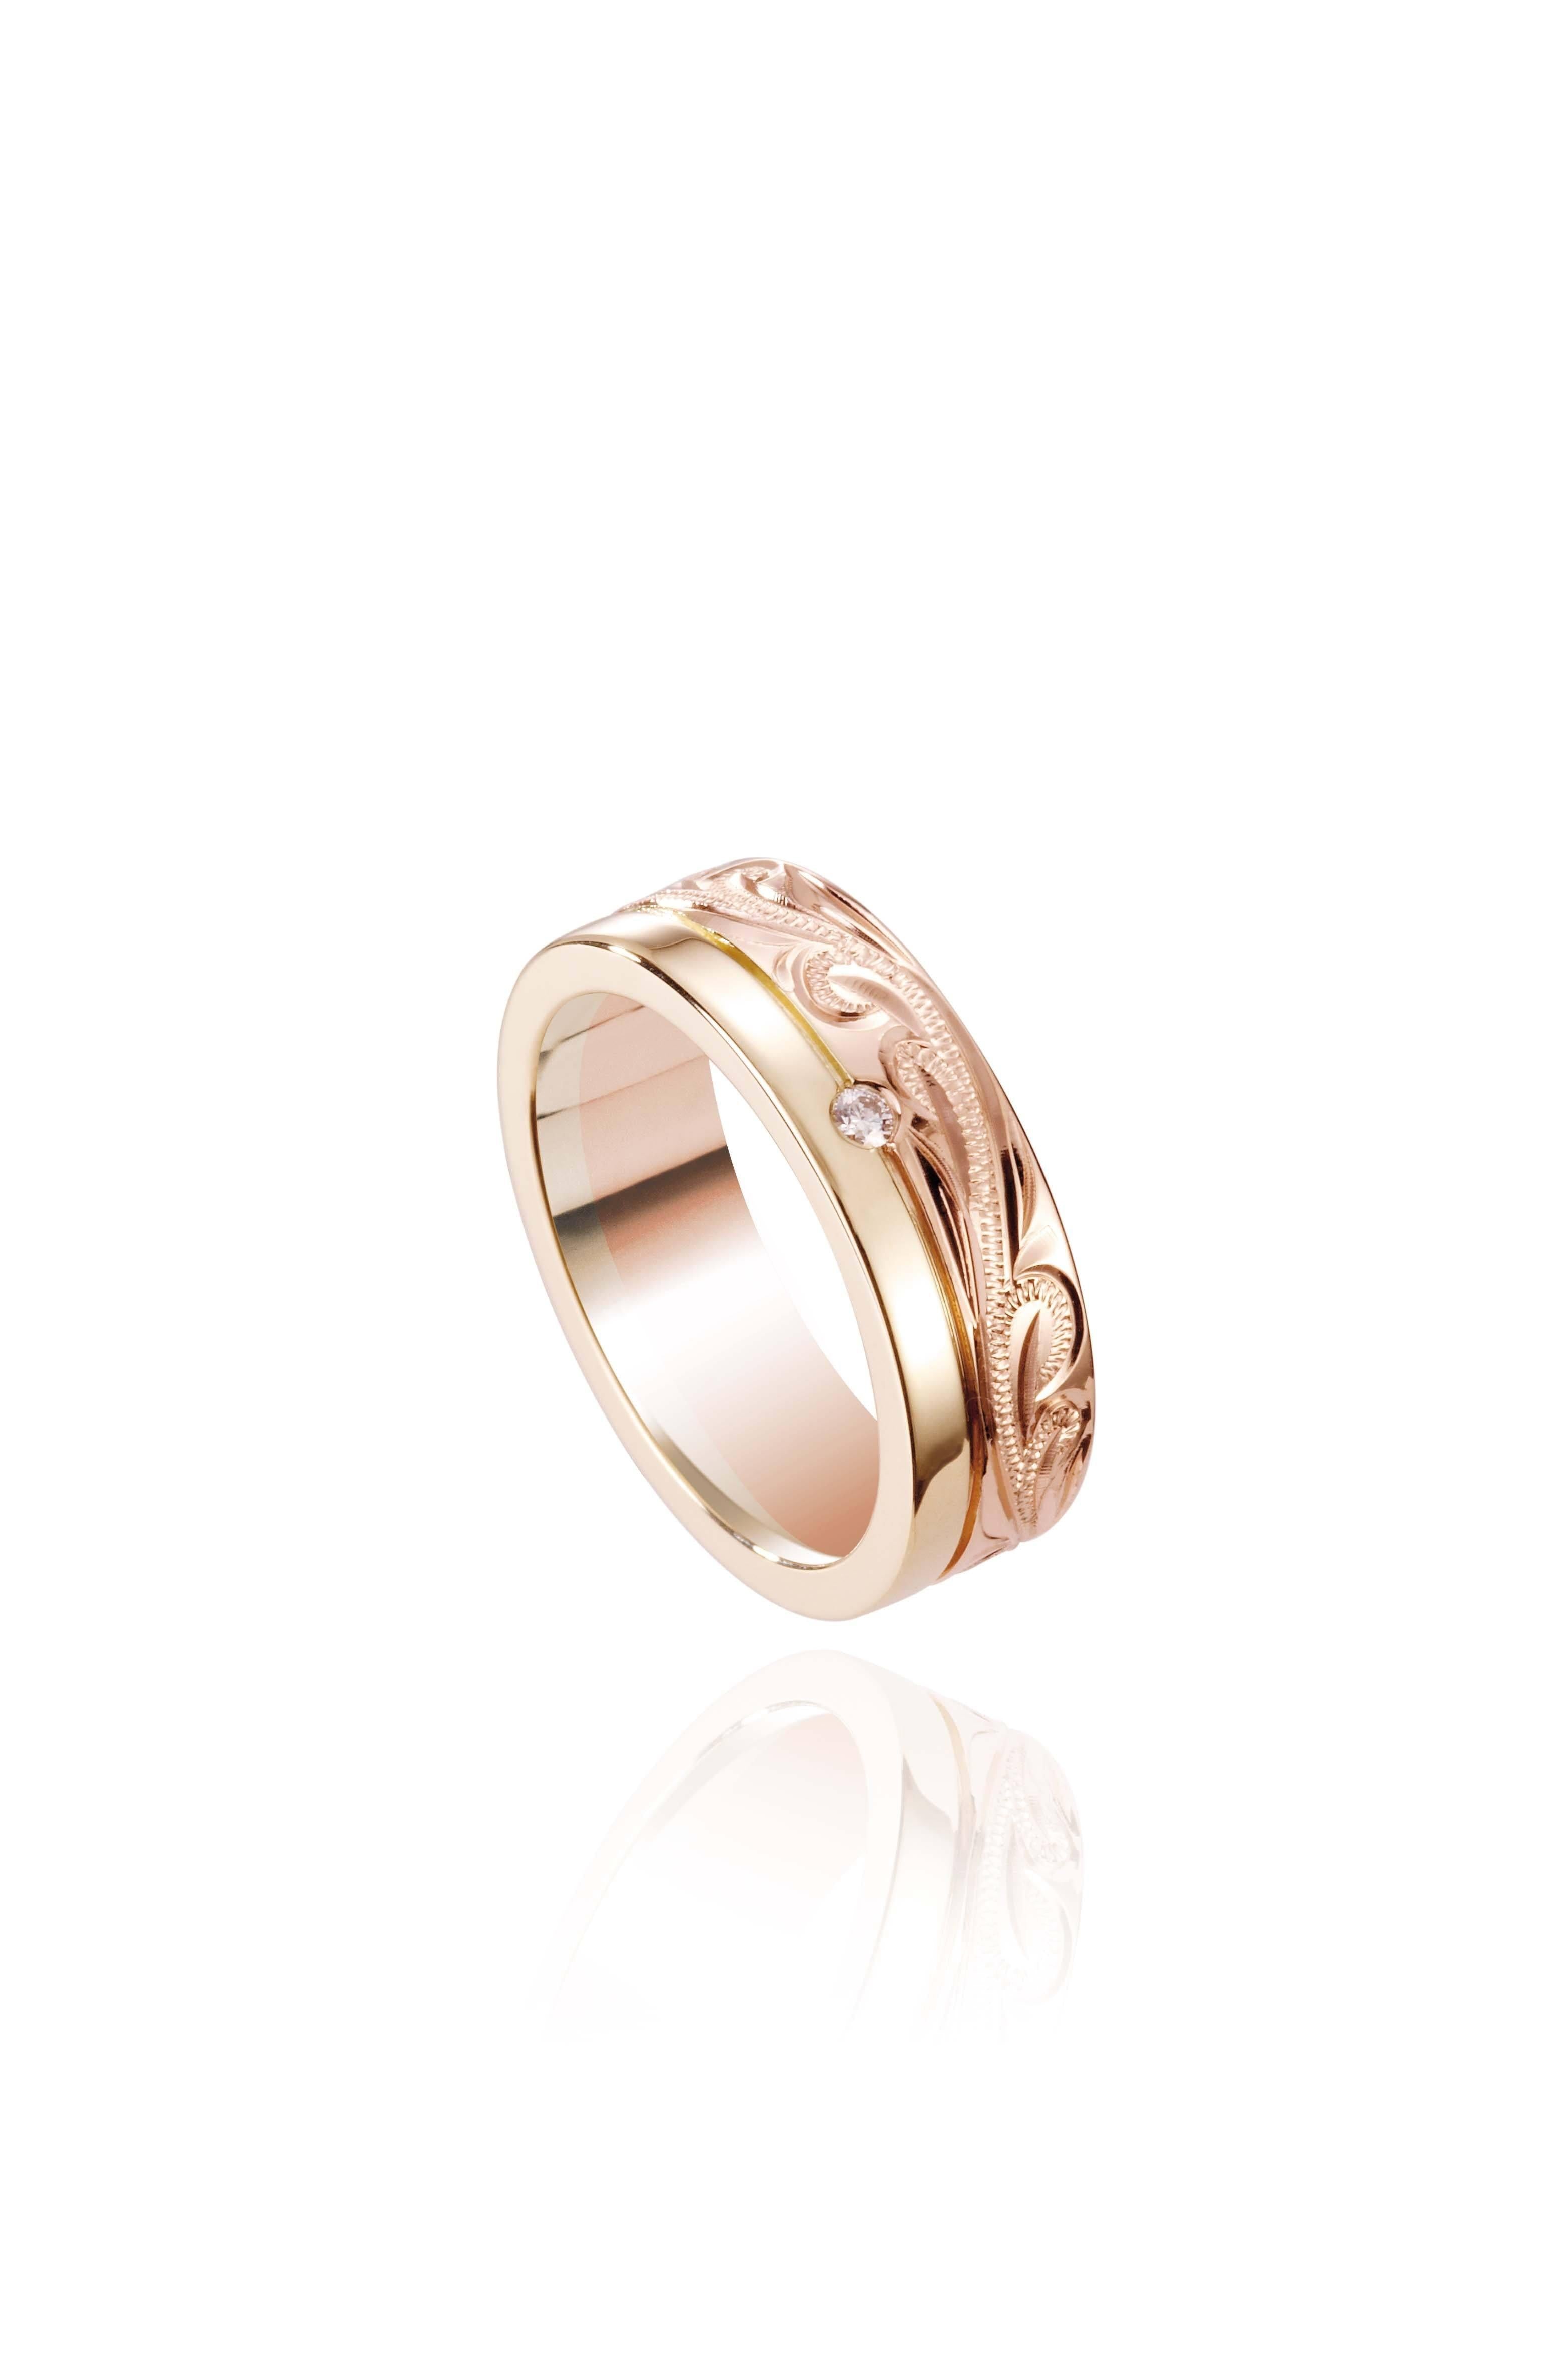 The picture shows a 14K yellow and rose gold two-tone pinched channel 6mm ring with a diamond, and hand-engravings.